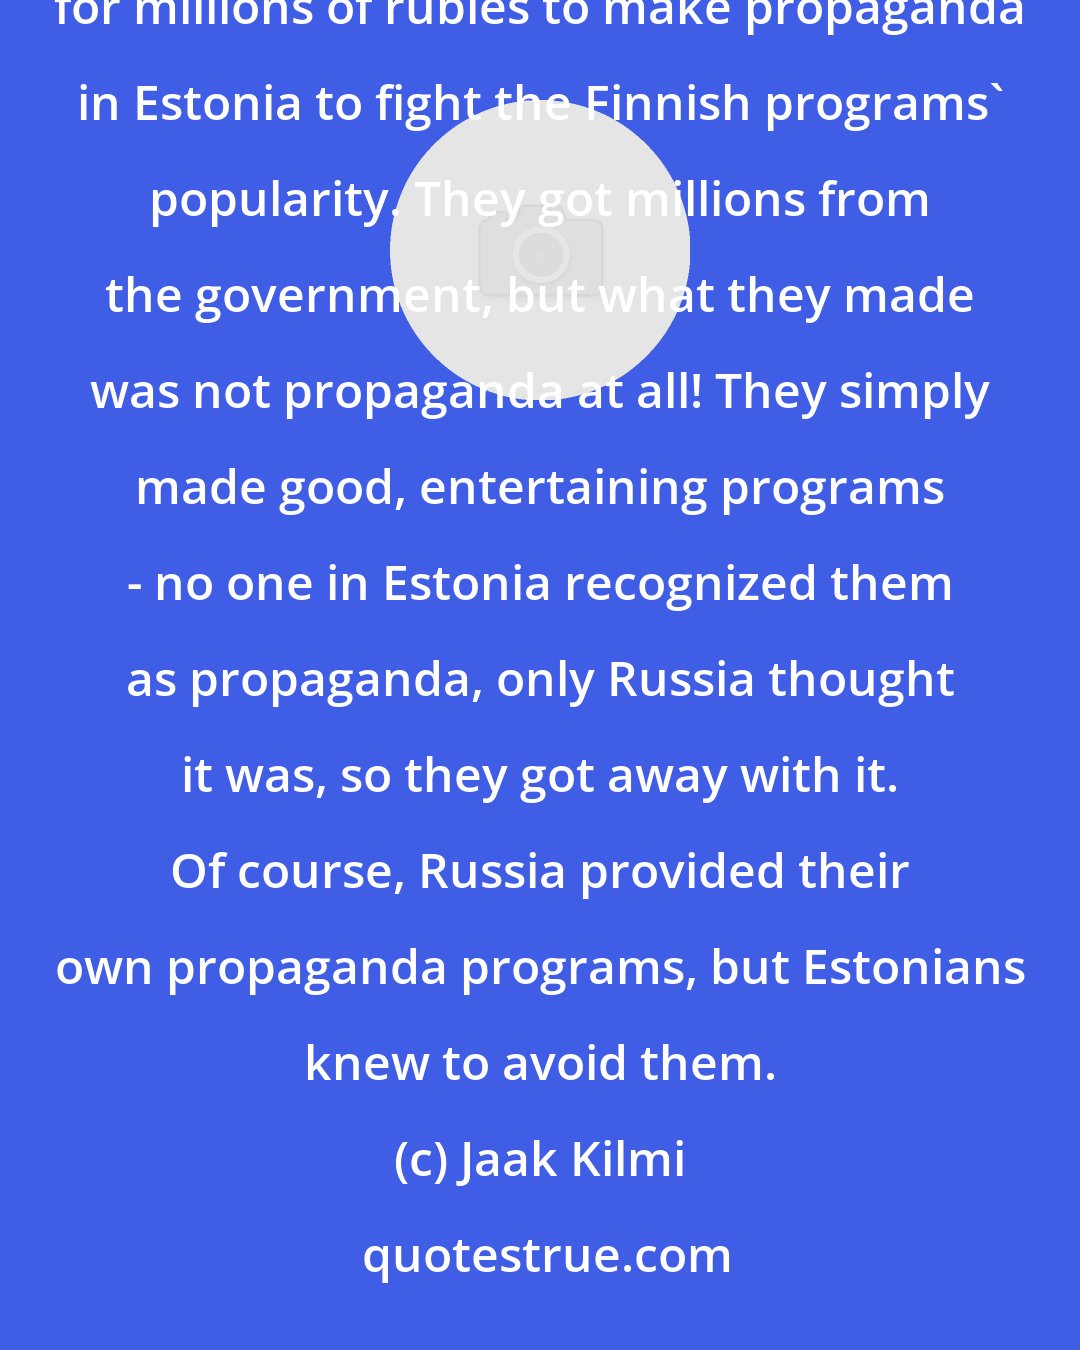 Jaak Kilmi: In the mid-1980s, however, the Estonian TV programmers came up with a clever idea: they asked Moscow for millions of rubles to make propaganda in Estonia to fight the Finnish programs' popularity. They got millions from the government, but what they made was not propaganda at all! They simply made good, entertaining programs - no one in Estonia recognized them as propaganda, only Russia thought it was, so they got away with it. Of course, Russia provided their own propaganda programs, but Estonians knew to avoid them.